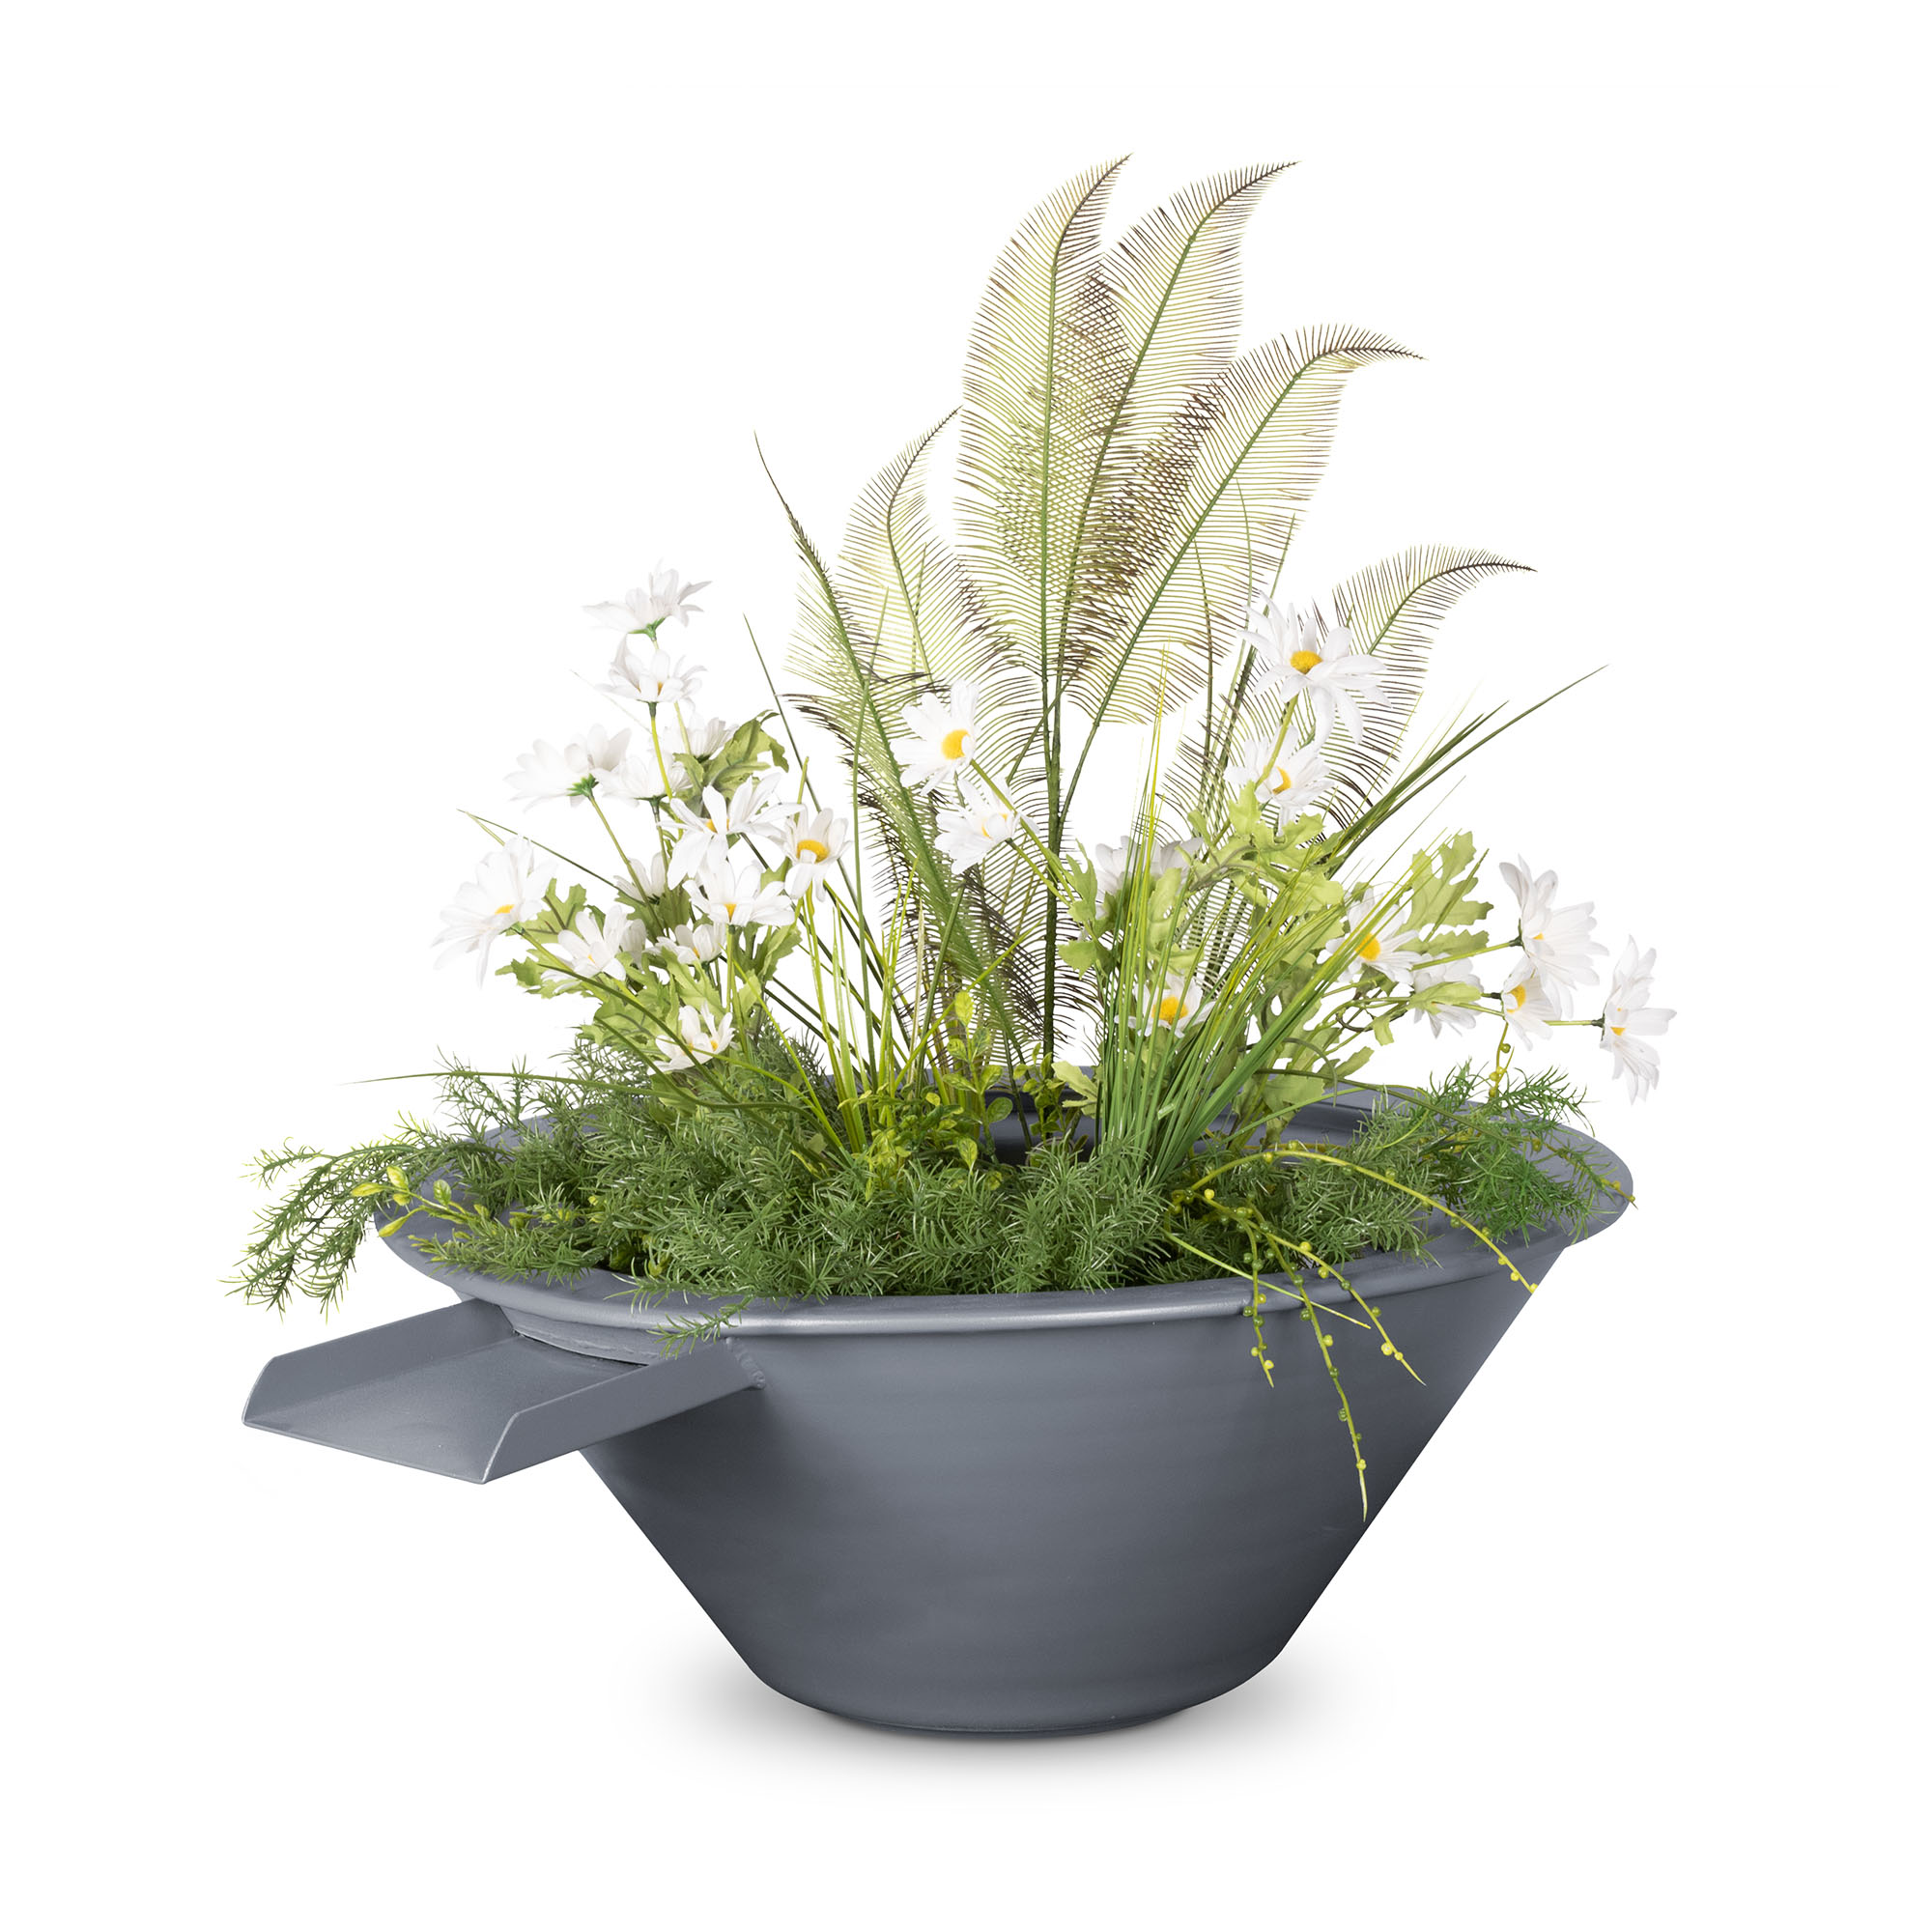 Cazo Powder Coated Planter Only - gray